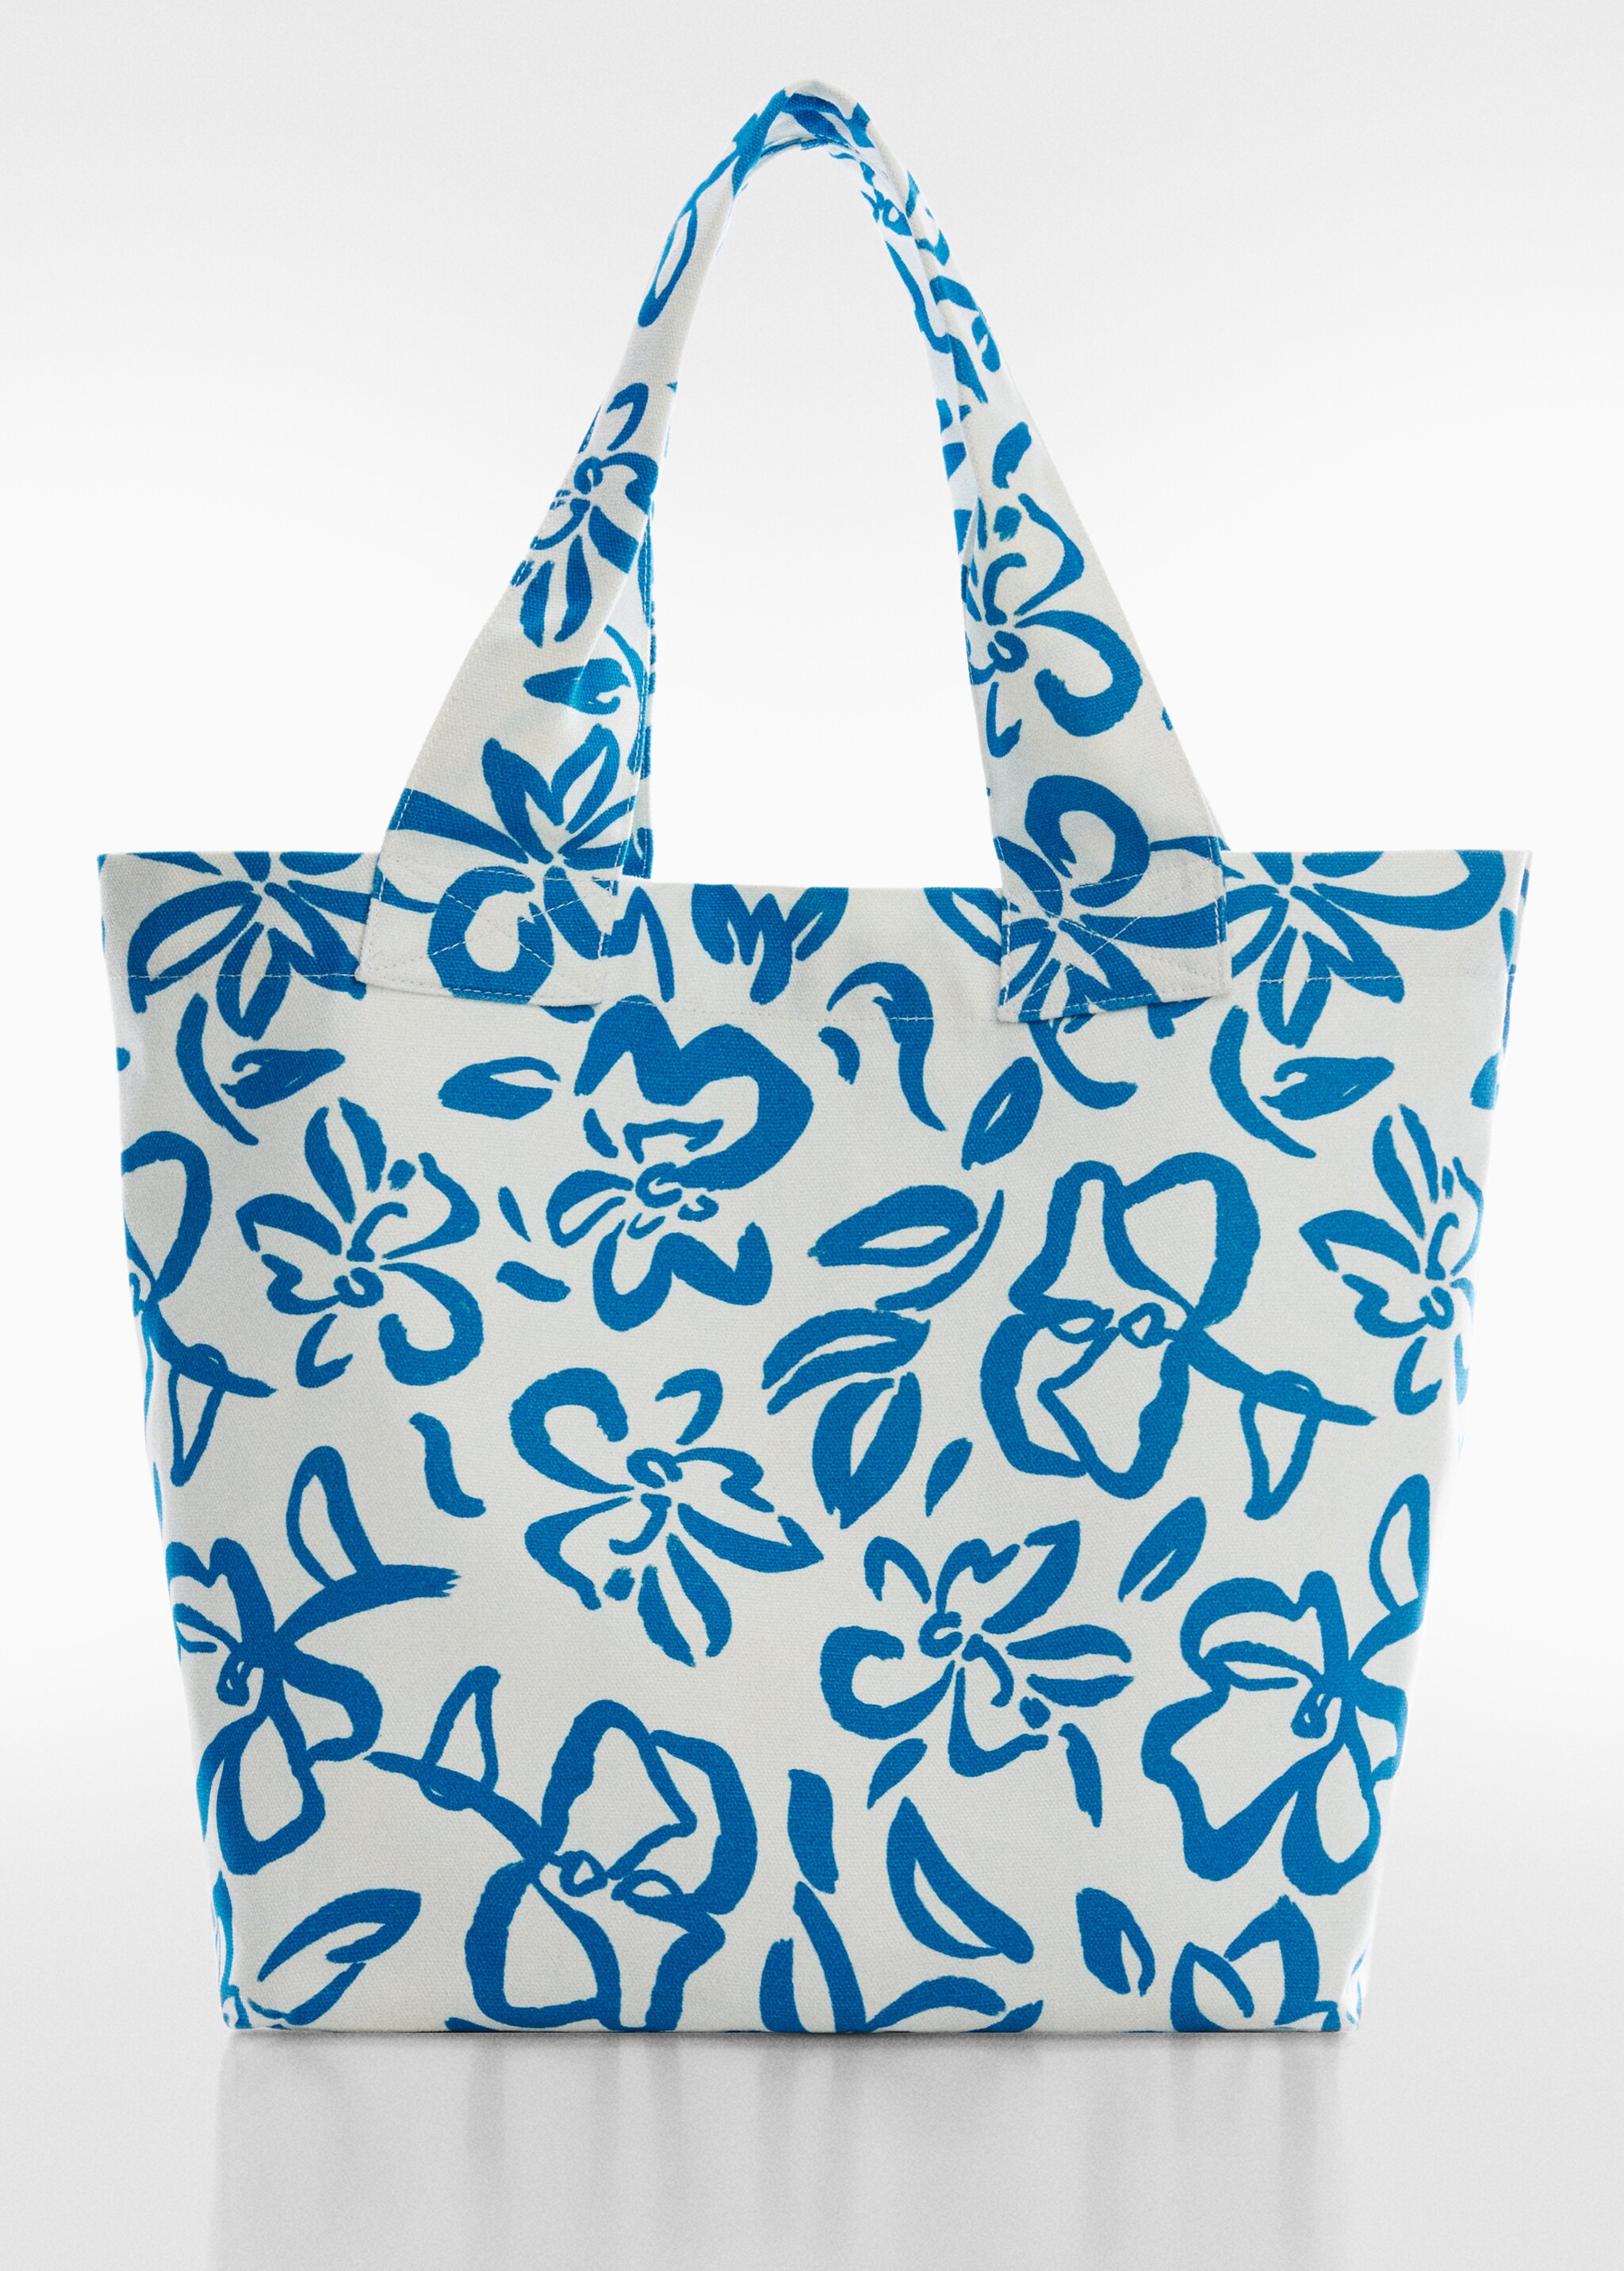 Floral tote bag - Article without model